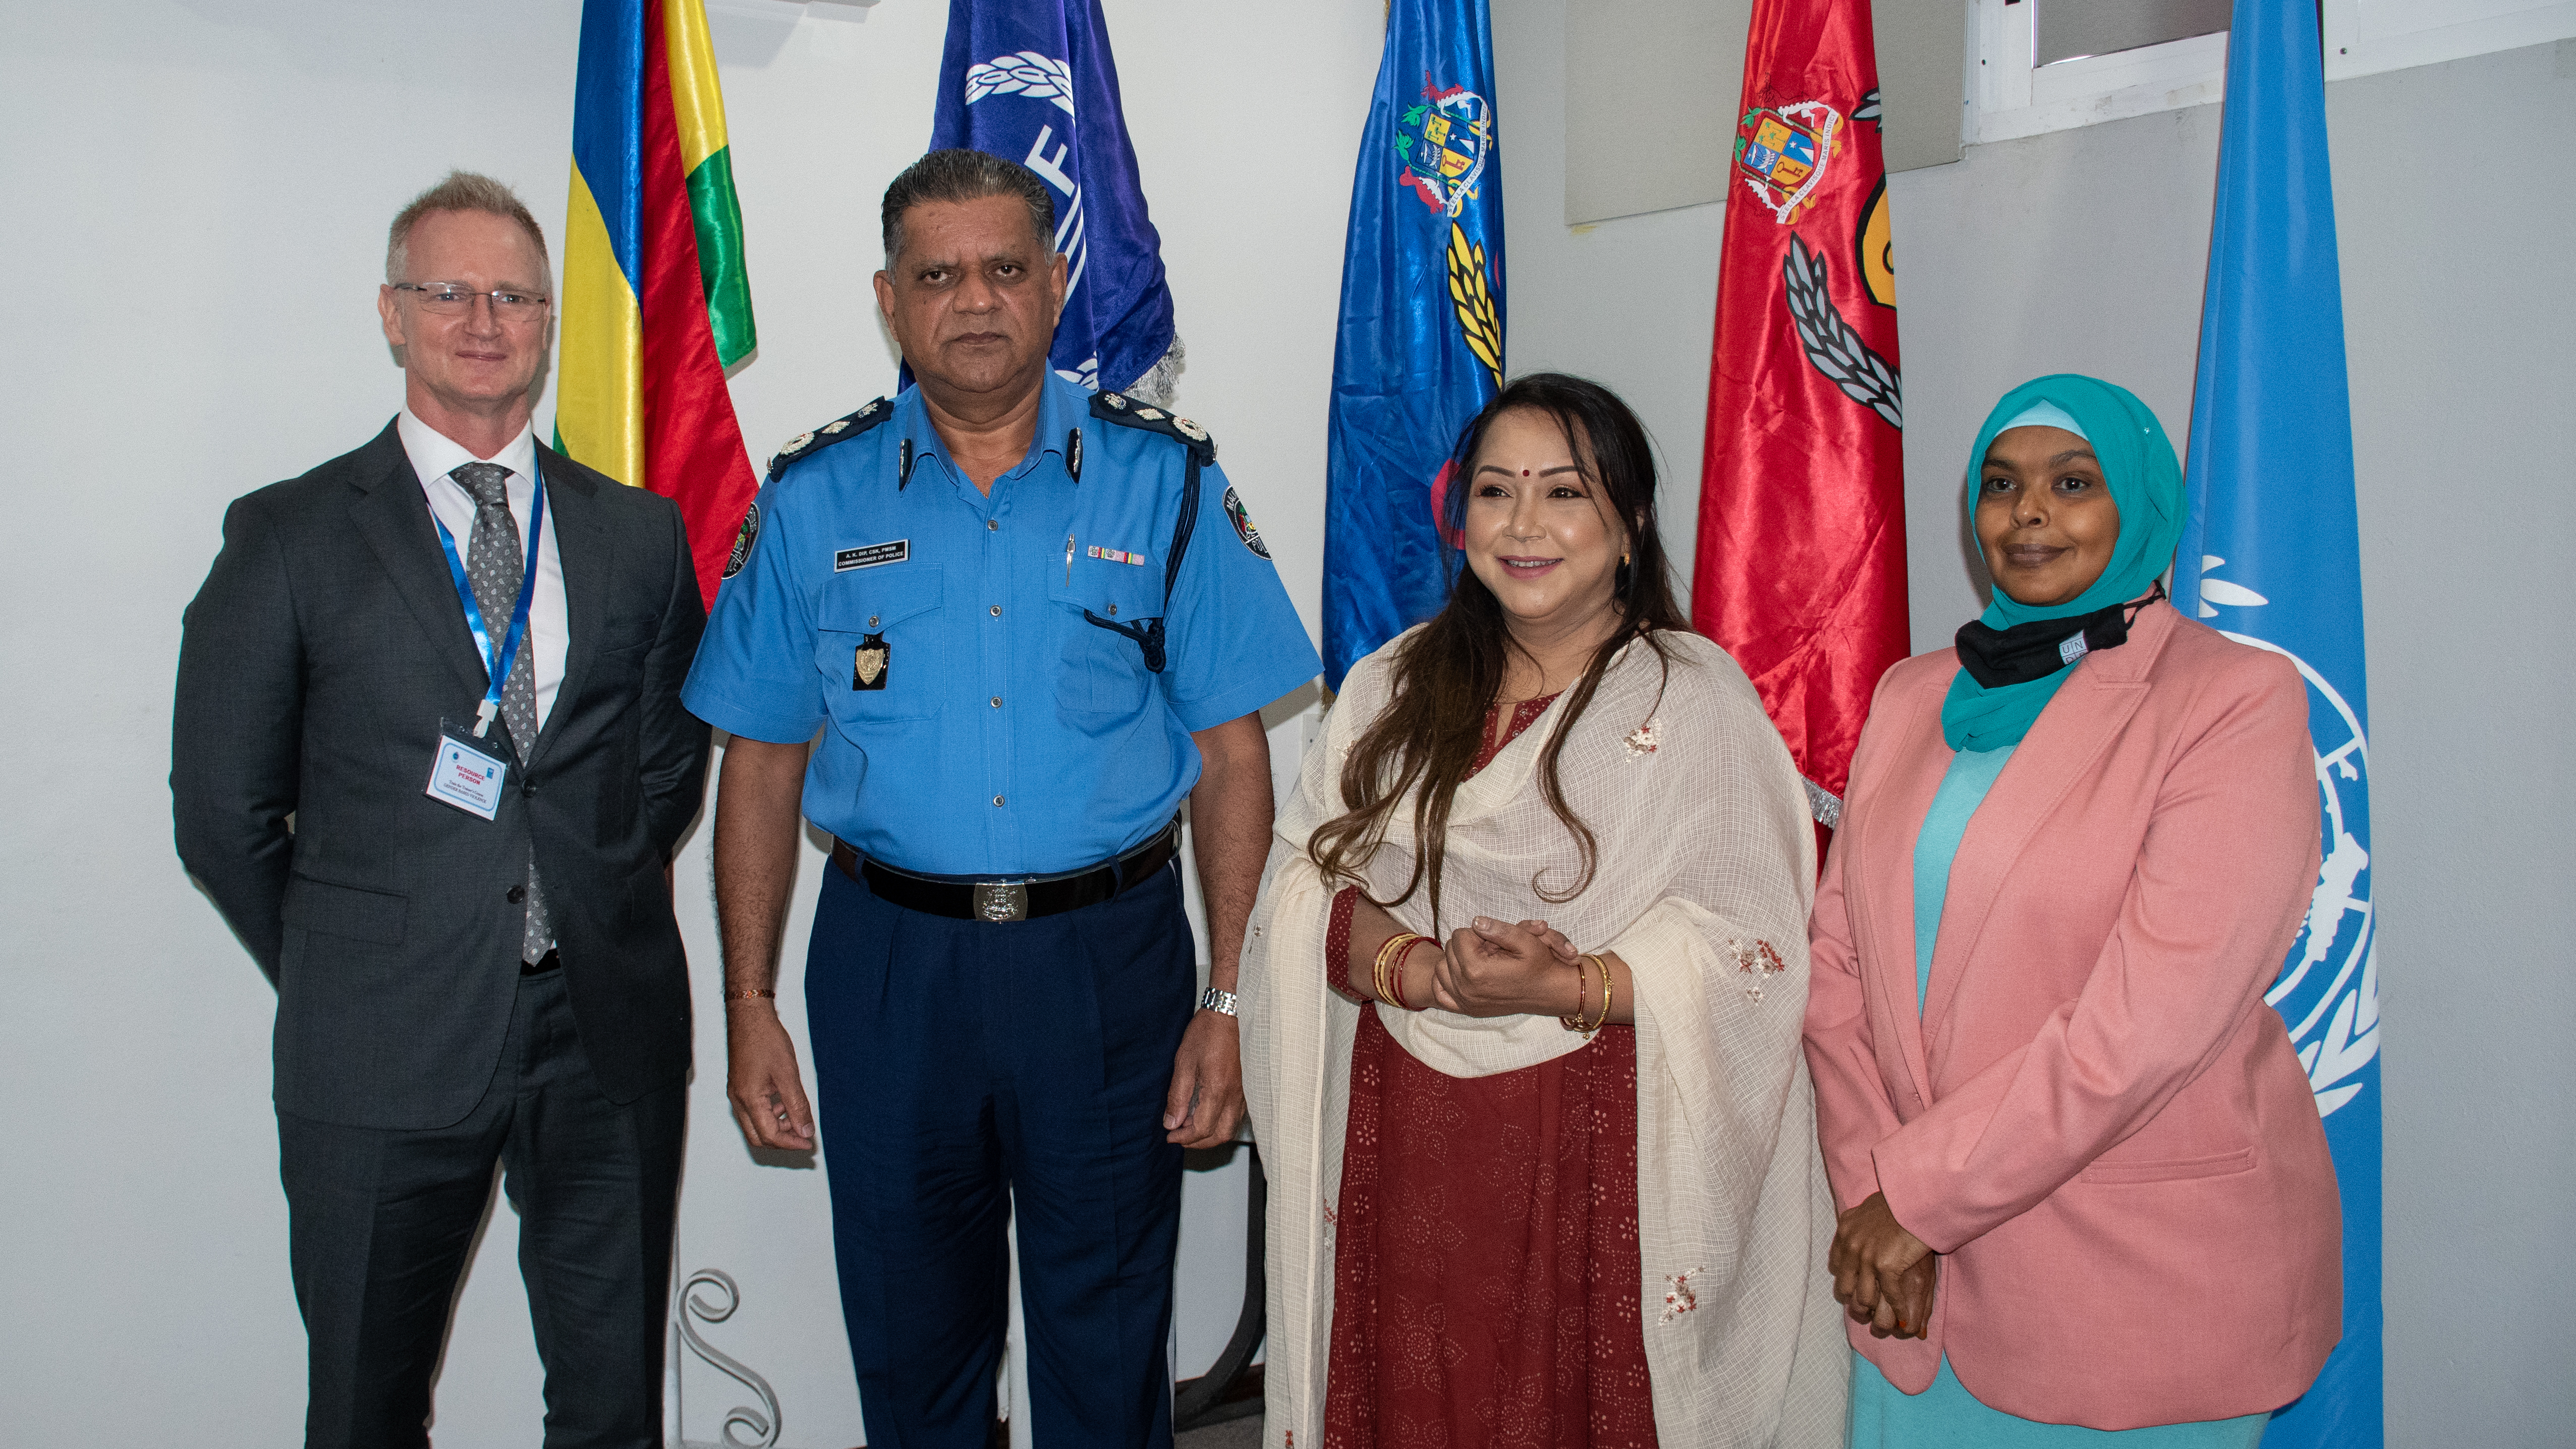 The UNDP supports capacity building for the Mauritius Police Force to improve response for Survivors and Perpetrators of Gender Based Violence.